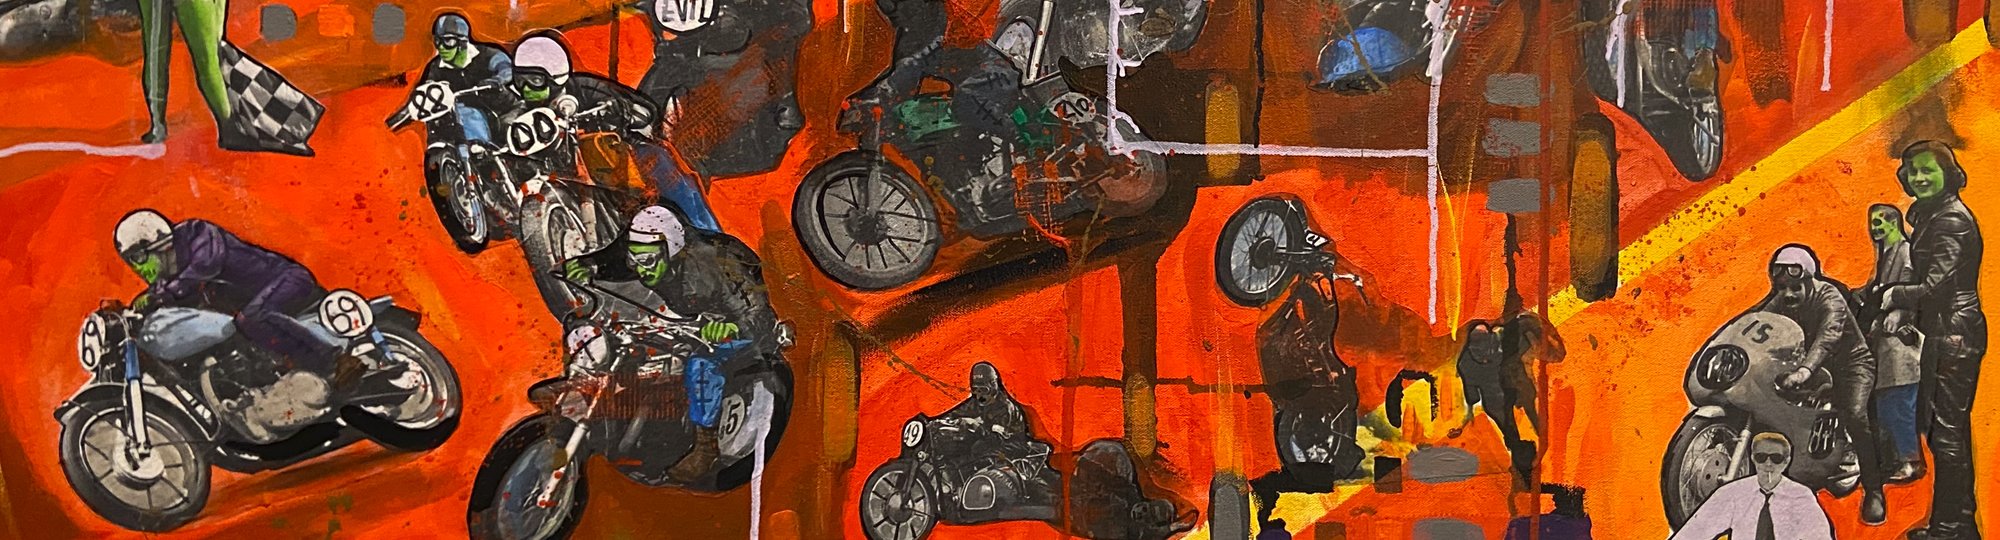 CYCLE OF MOTORS THE ART OF MOTORCYCLE CULTURE PAINTED WORKS BY BILL ALATALO